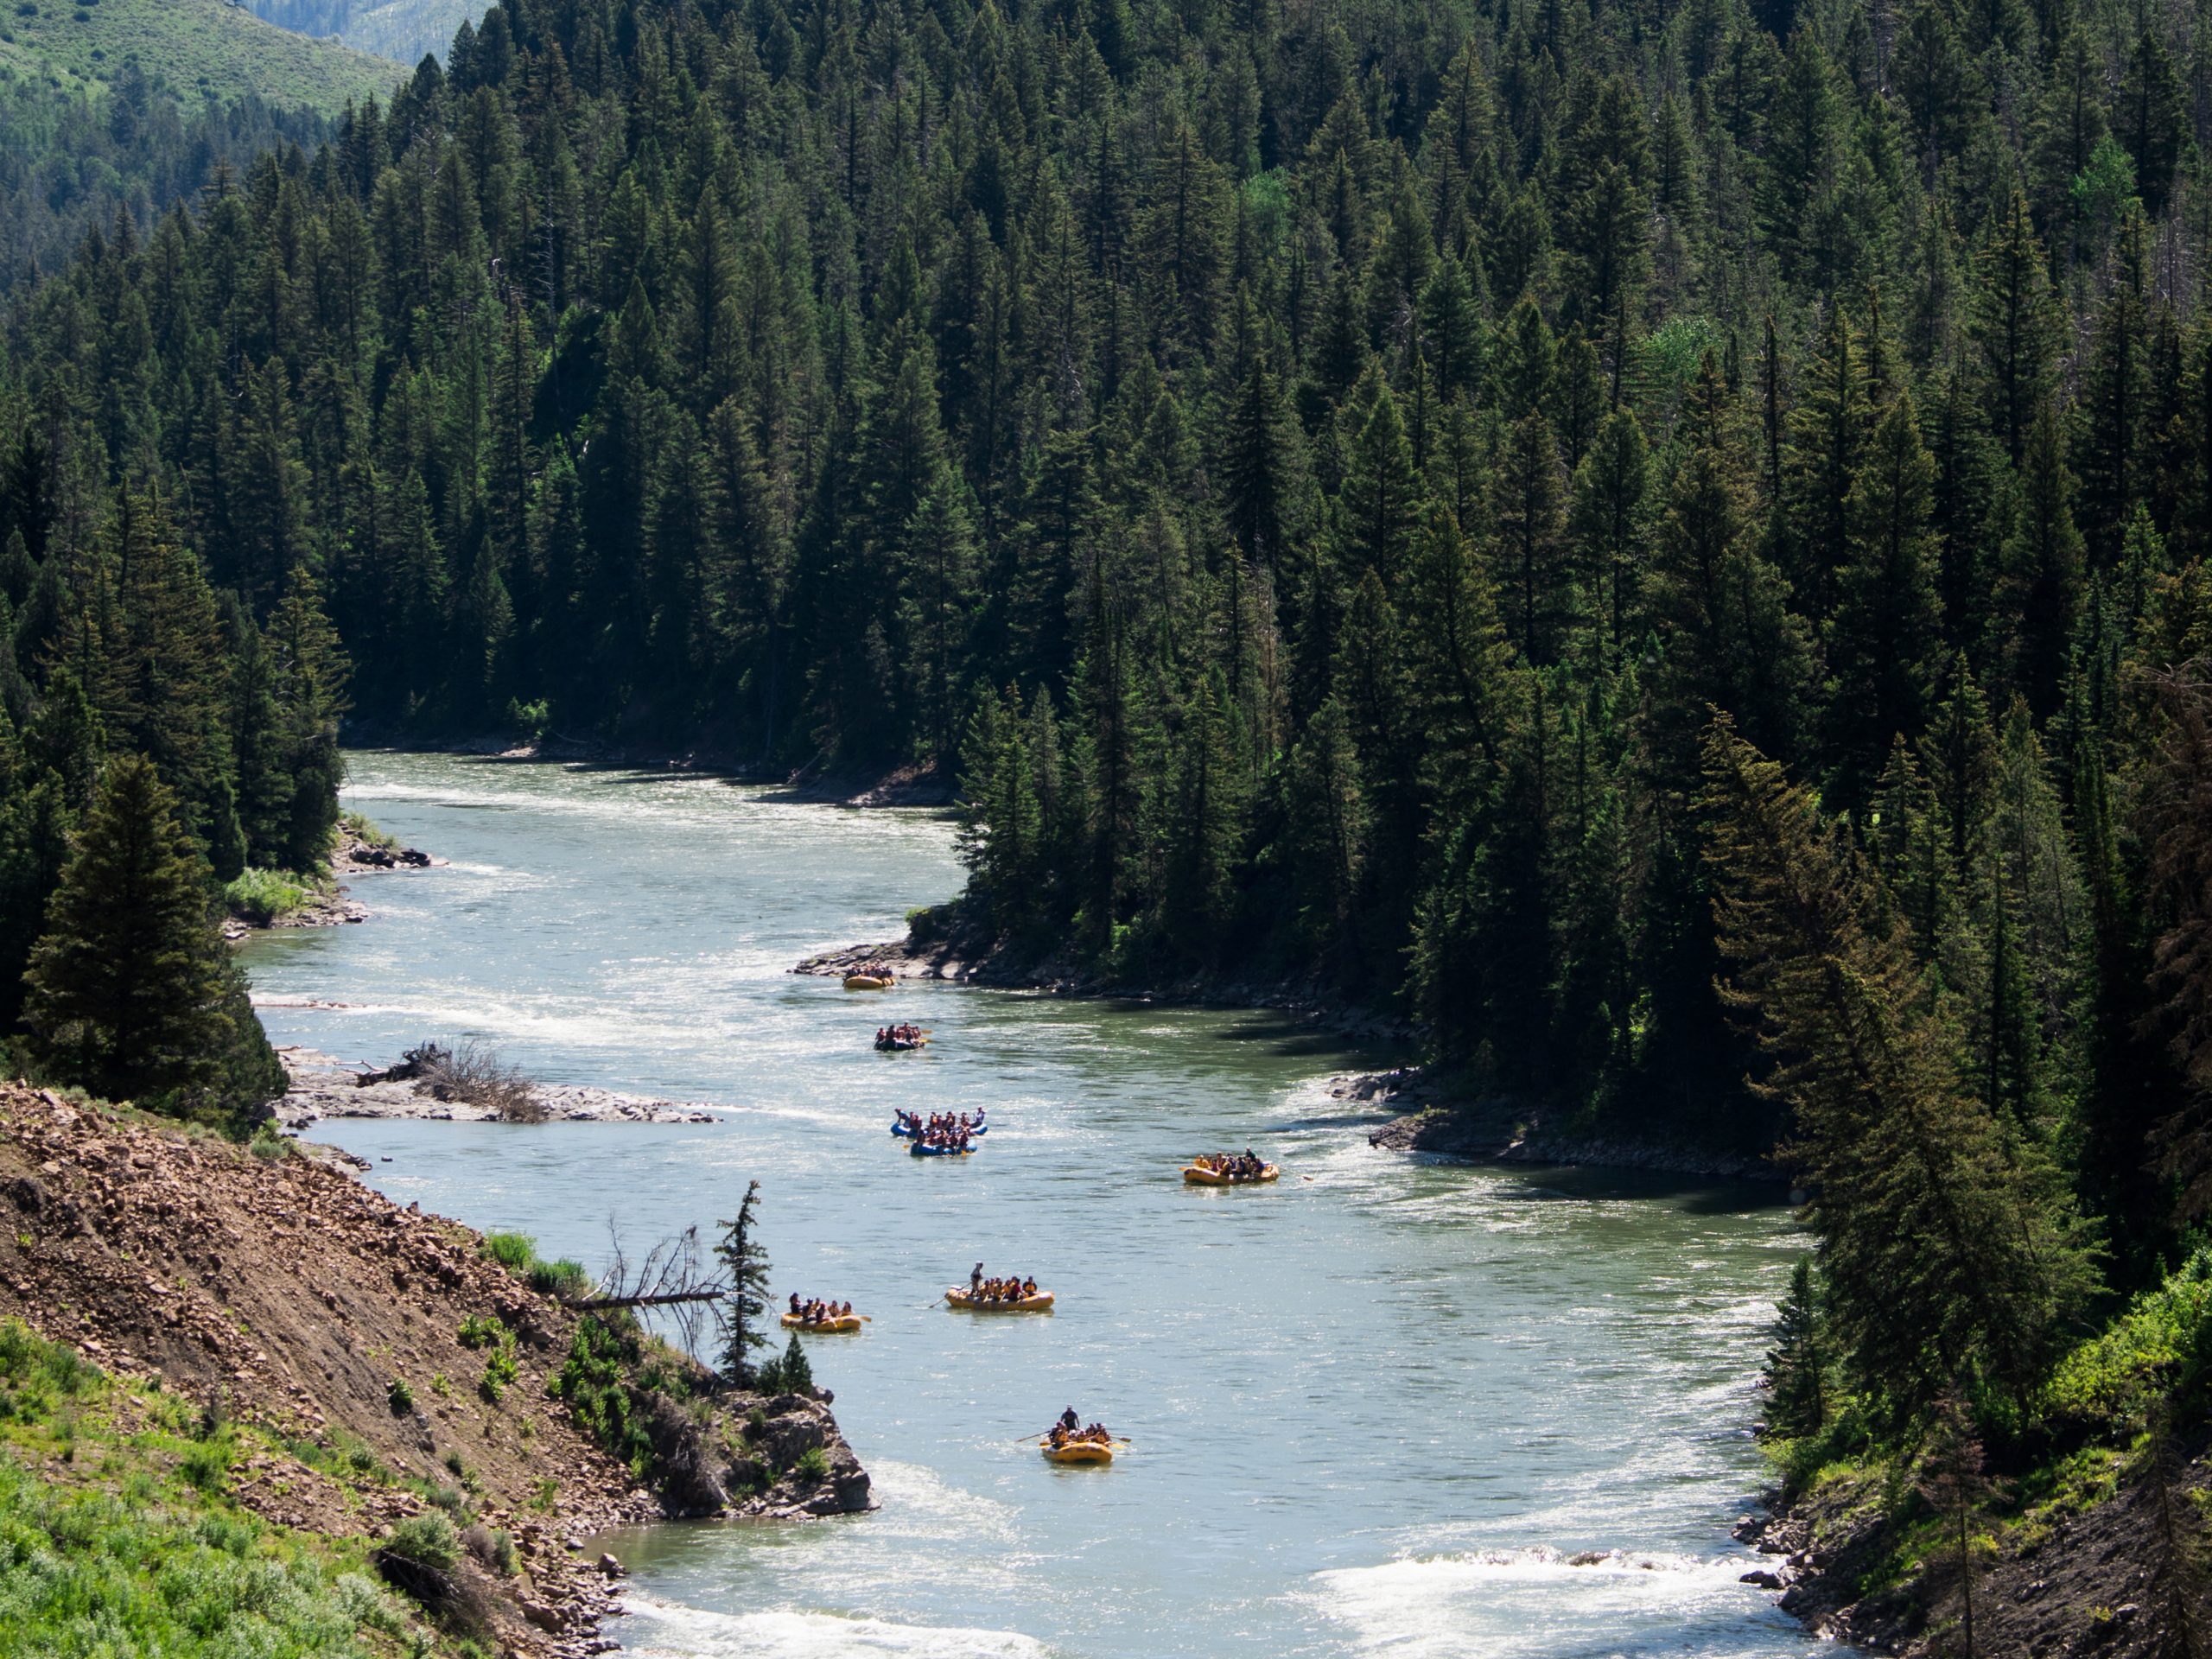 White Water Rafters float down the Snake River.